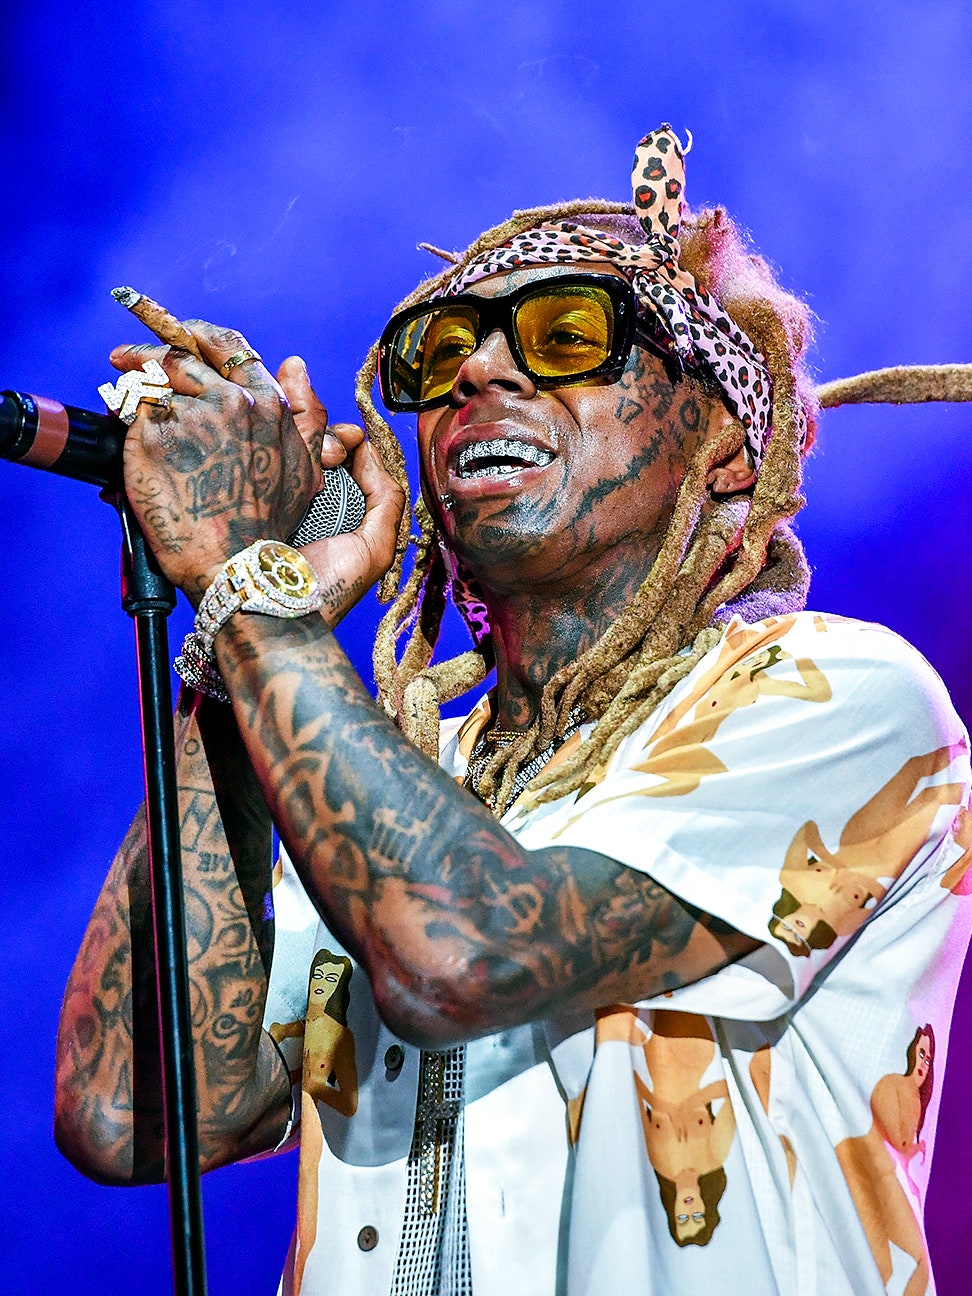 Lil Wayne Is Back with a New Album—and Even More New Merch